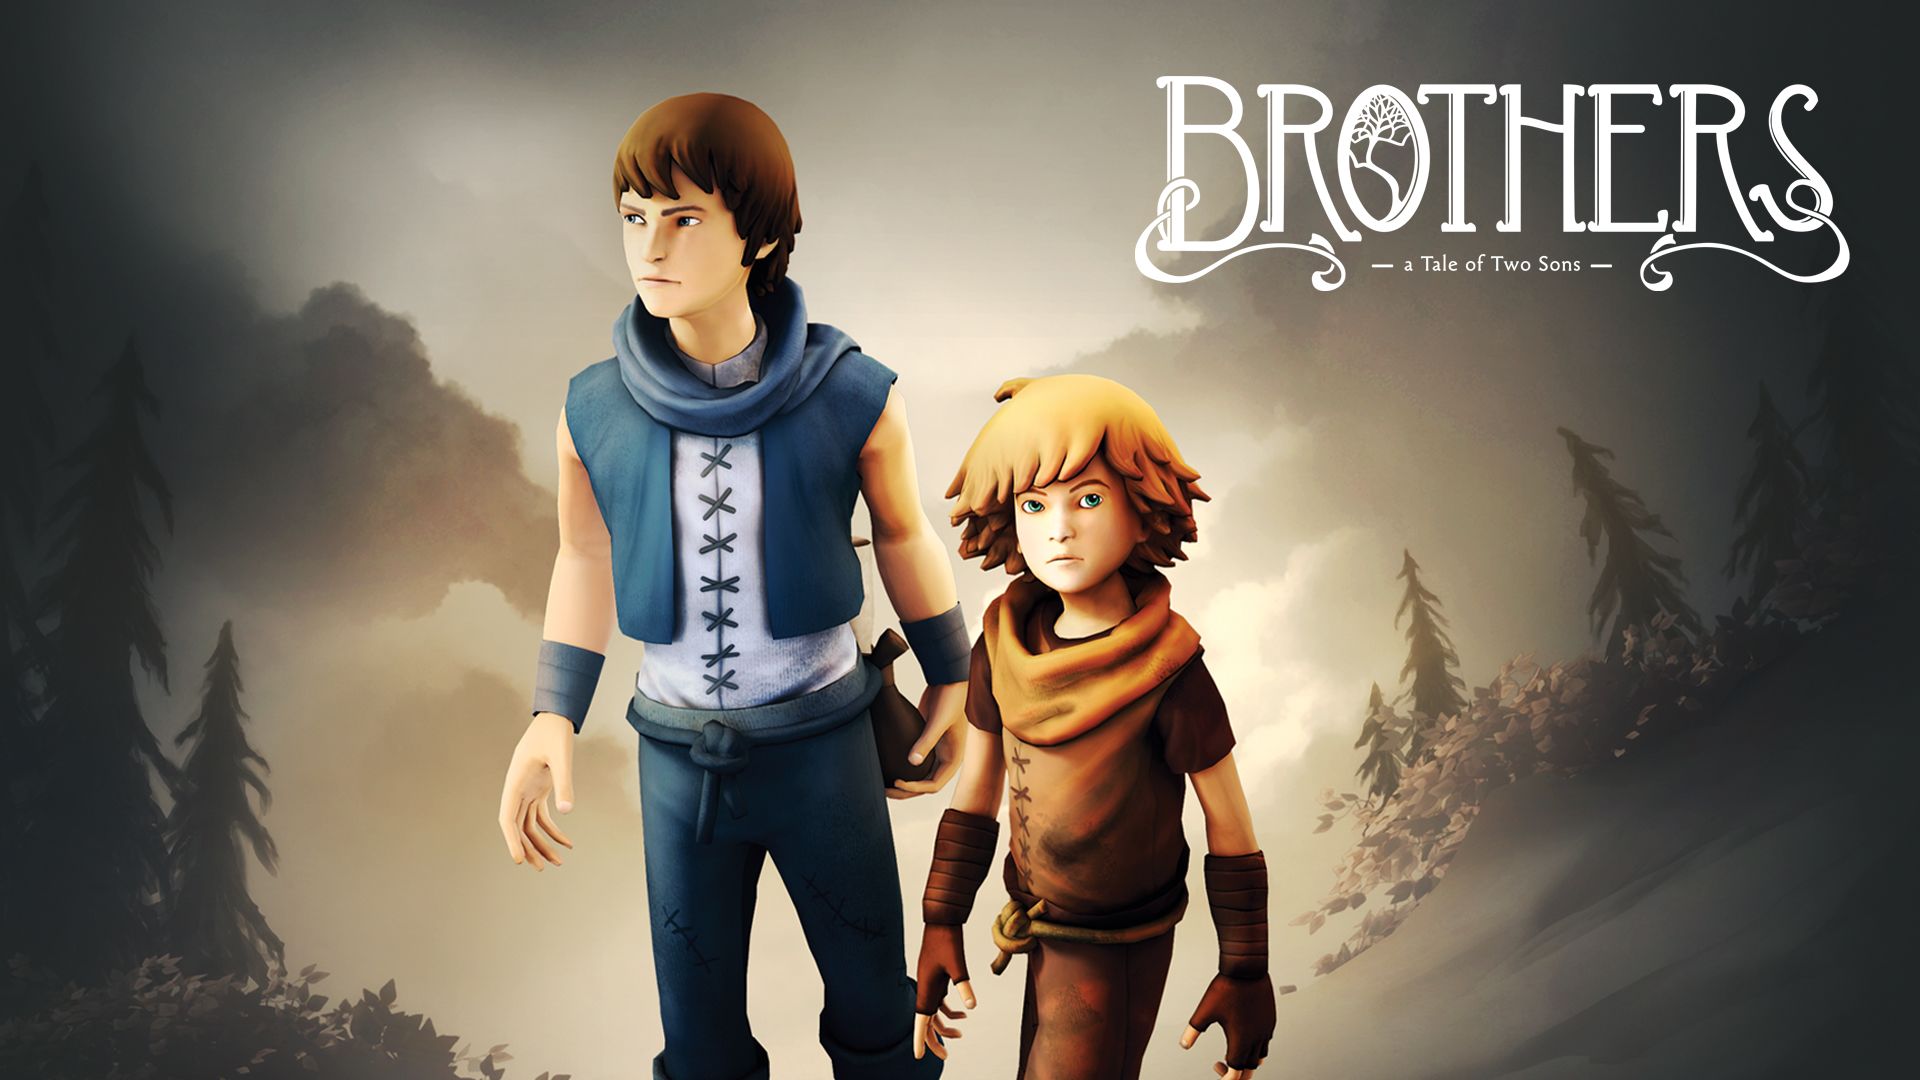 Two brothers ps4. Brothers a Tale of two sons ps4. Brothers: a Tale of two sons обложка. Brothers: a Tale of two sons | Player one волшебное дерево.